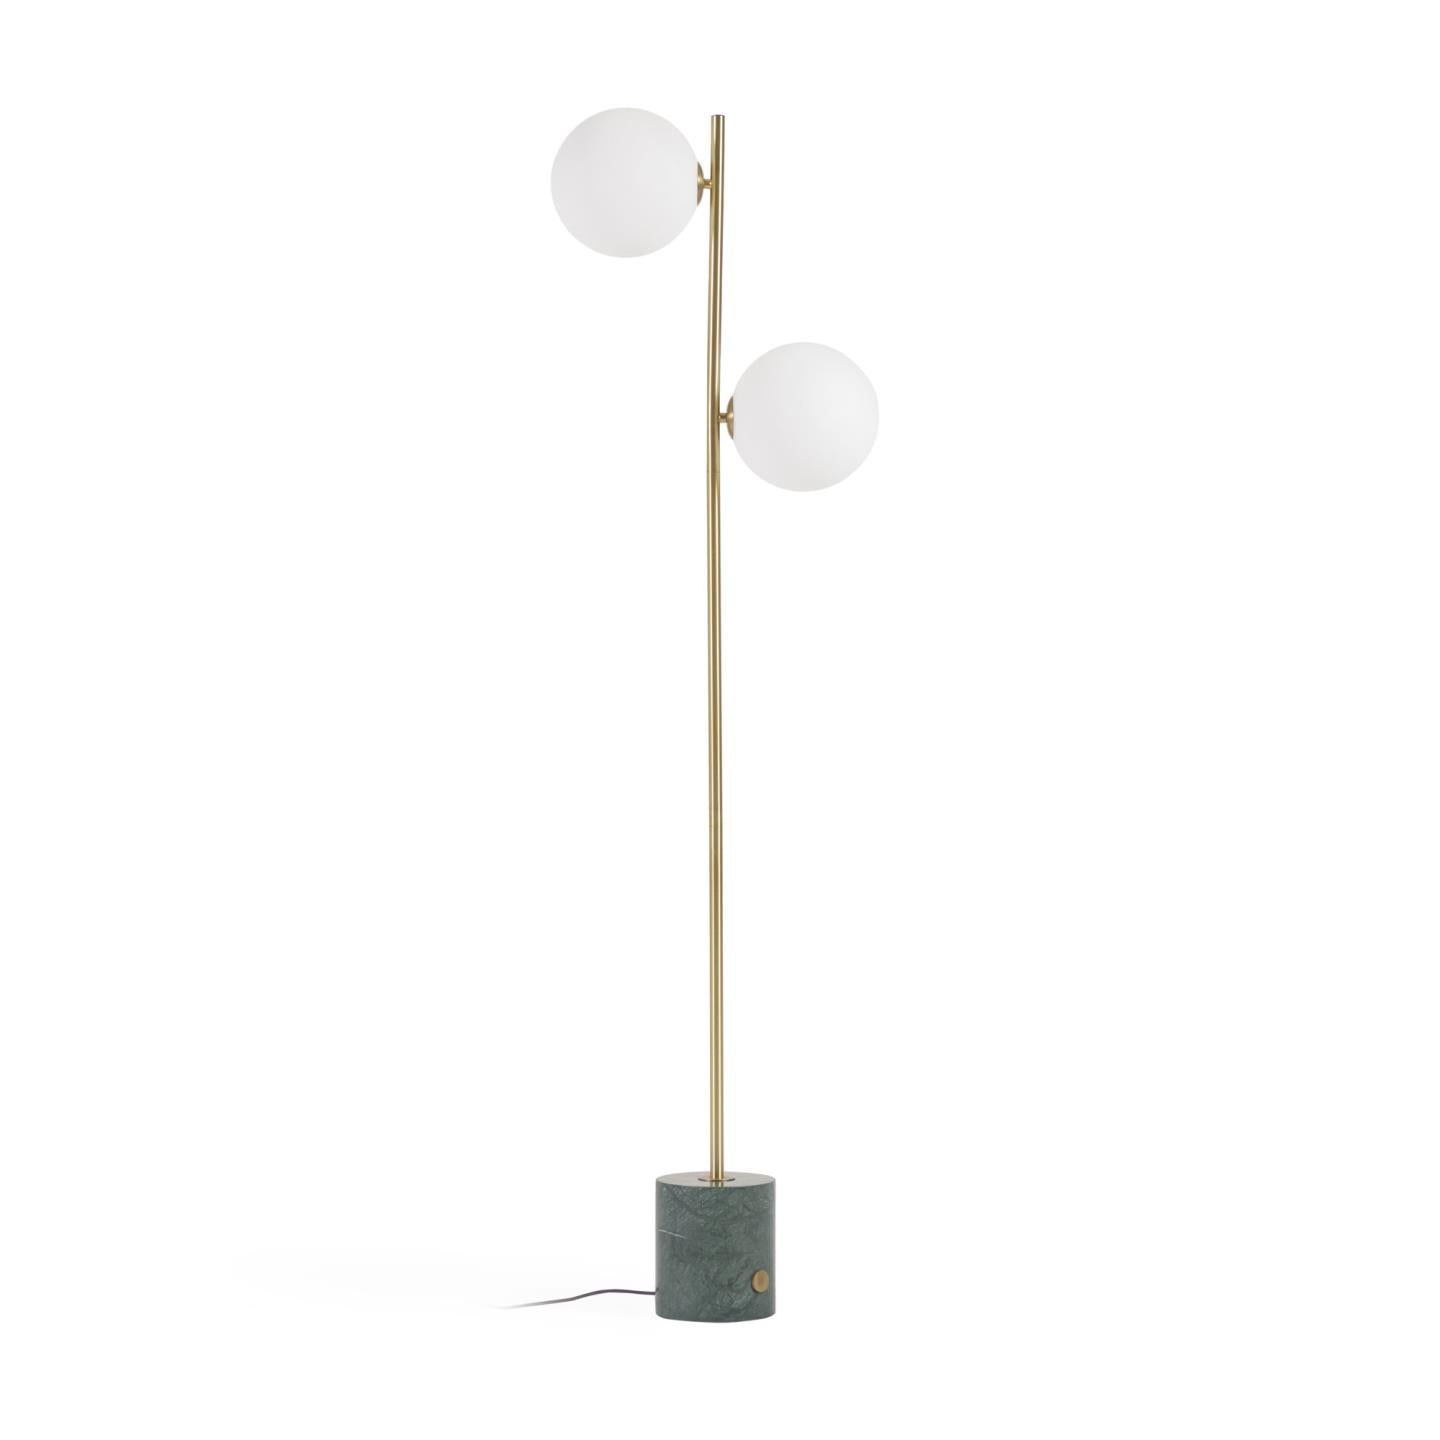 Lonela floor lamp in marble with green finish